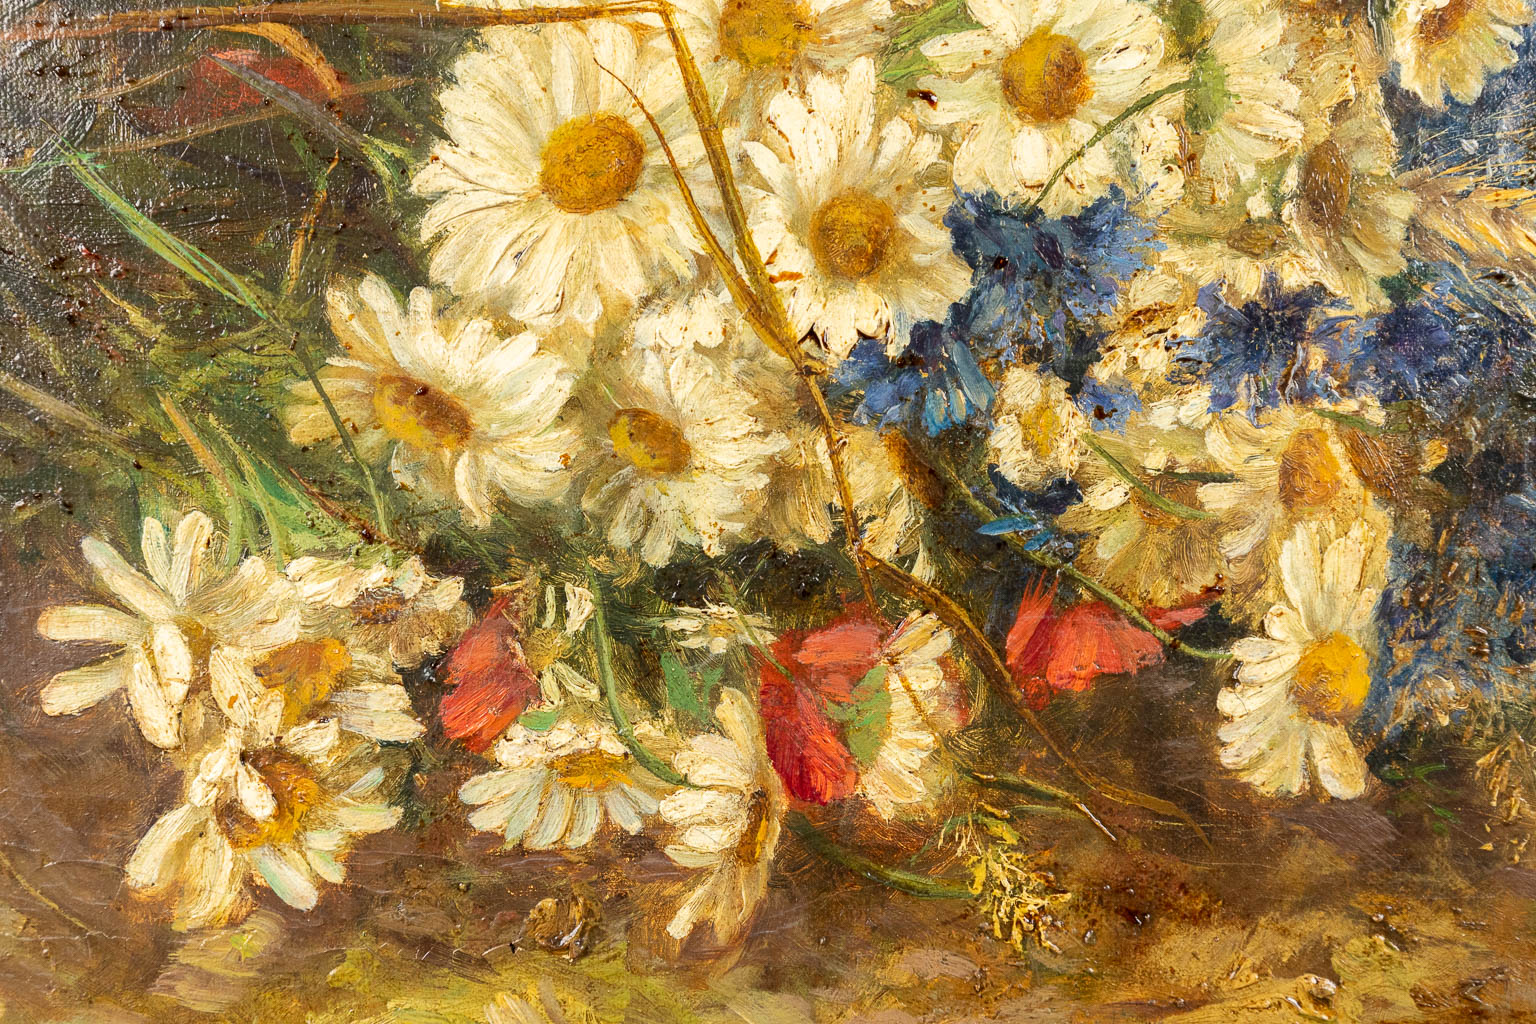 No signature found, a flower painting, oil on canvas. 20th century. (55 x 46 cm)